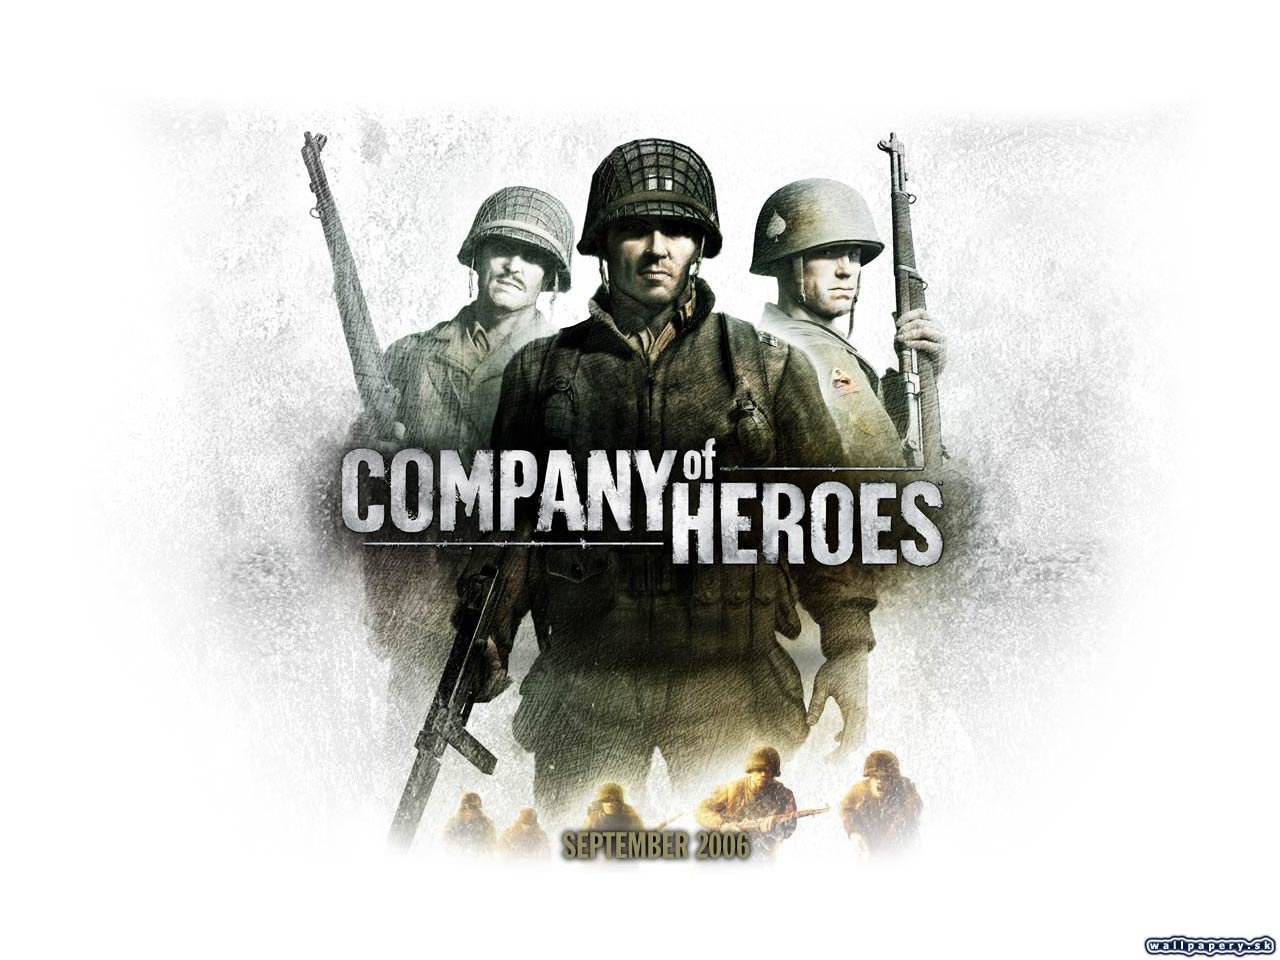 Company of Heroes - wallpaper 1